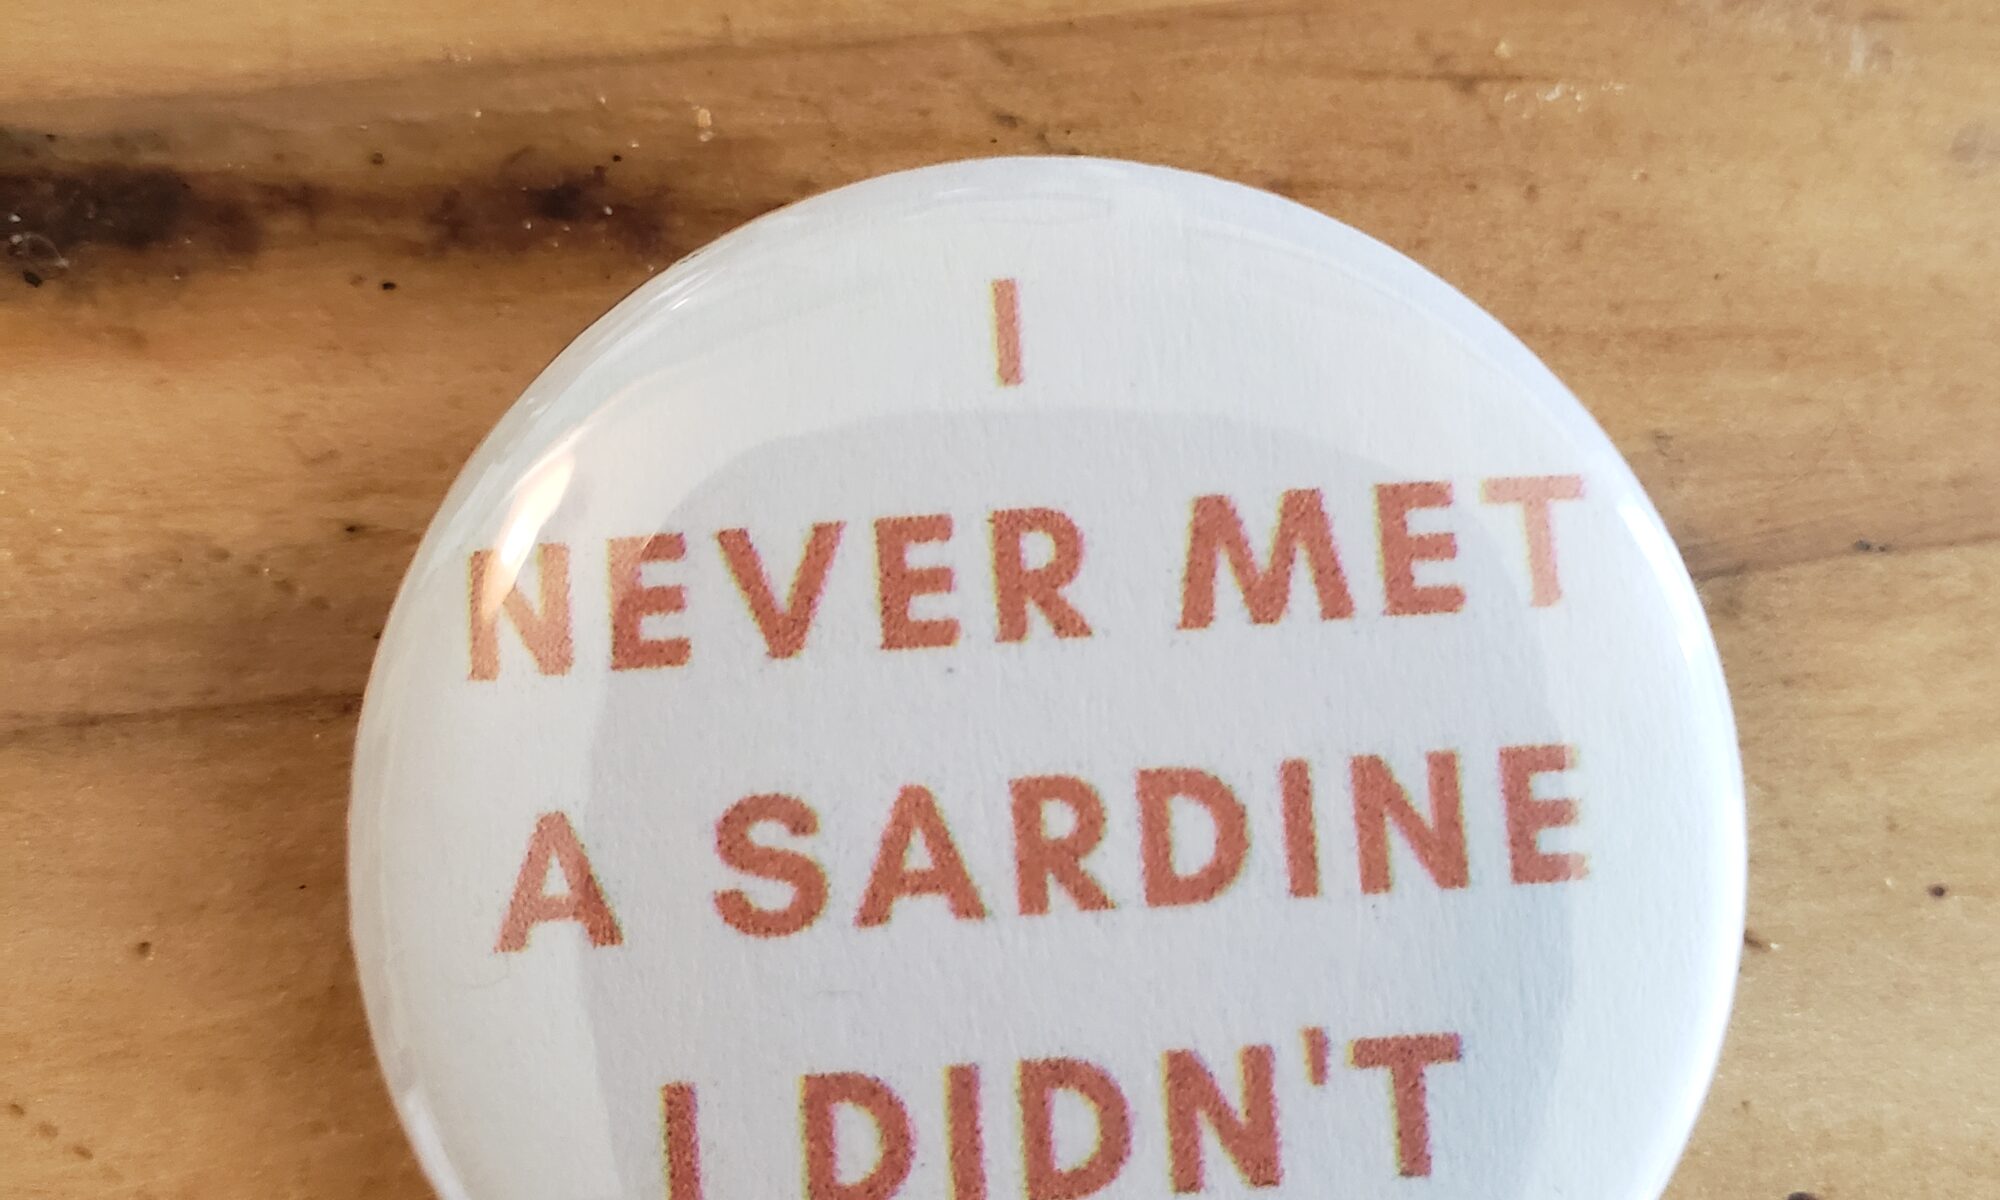 Image of "I never met a sardine I didn't eat" pinback button